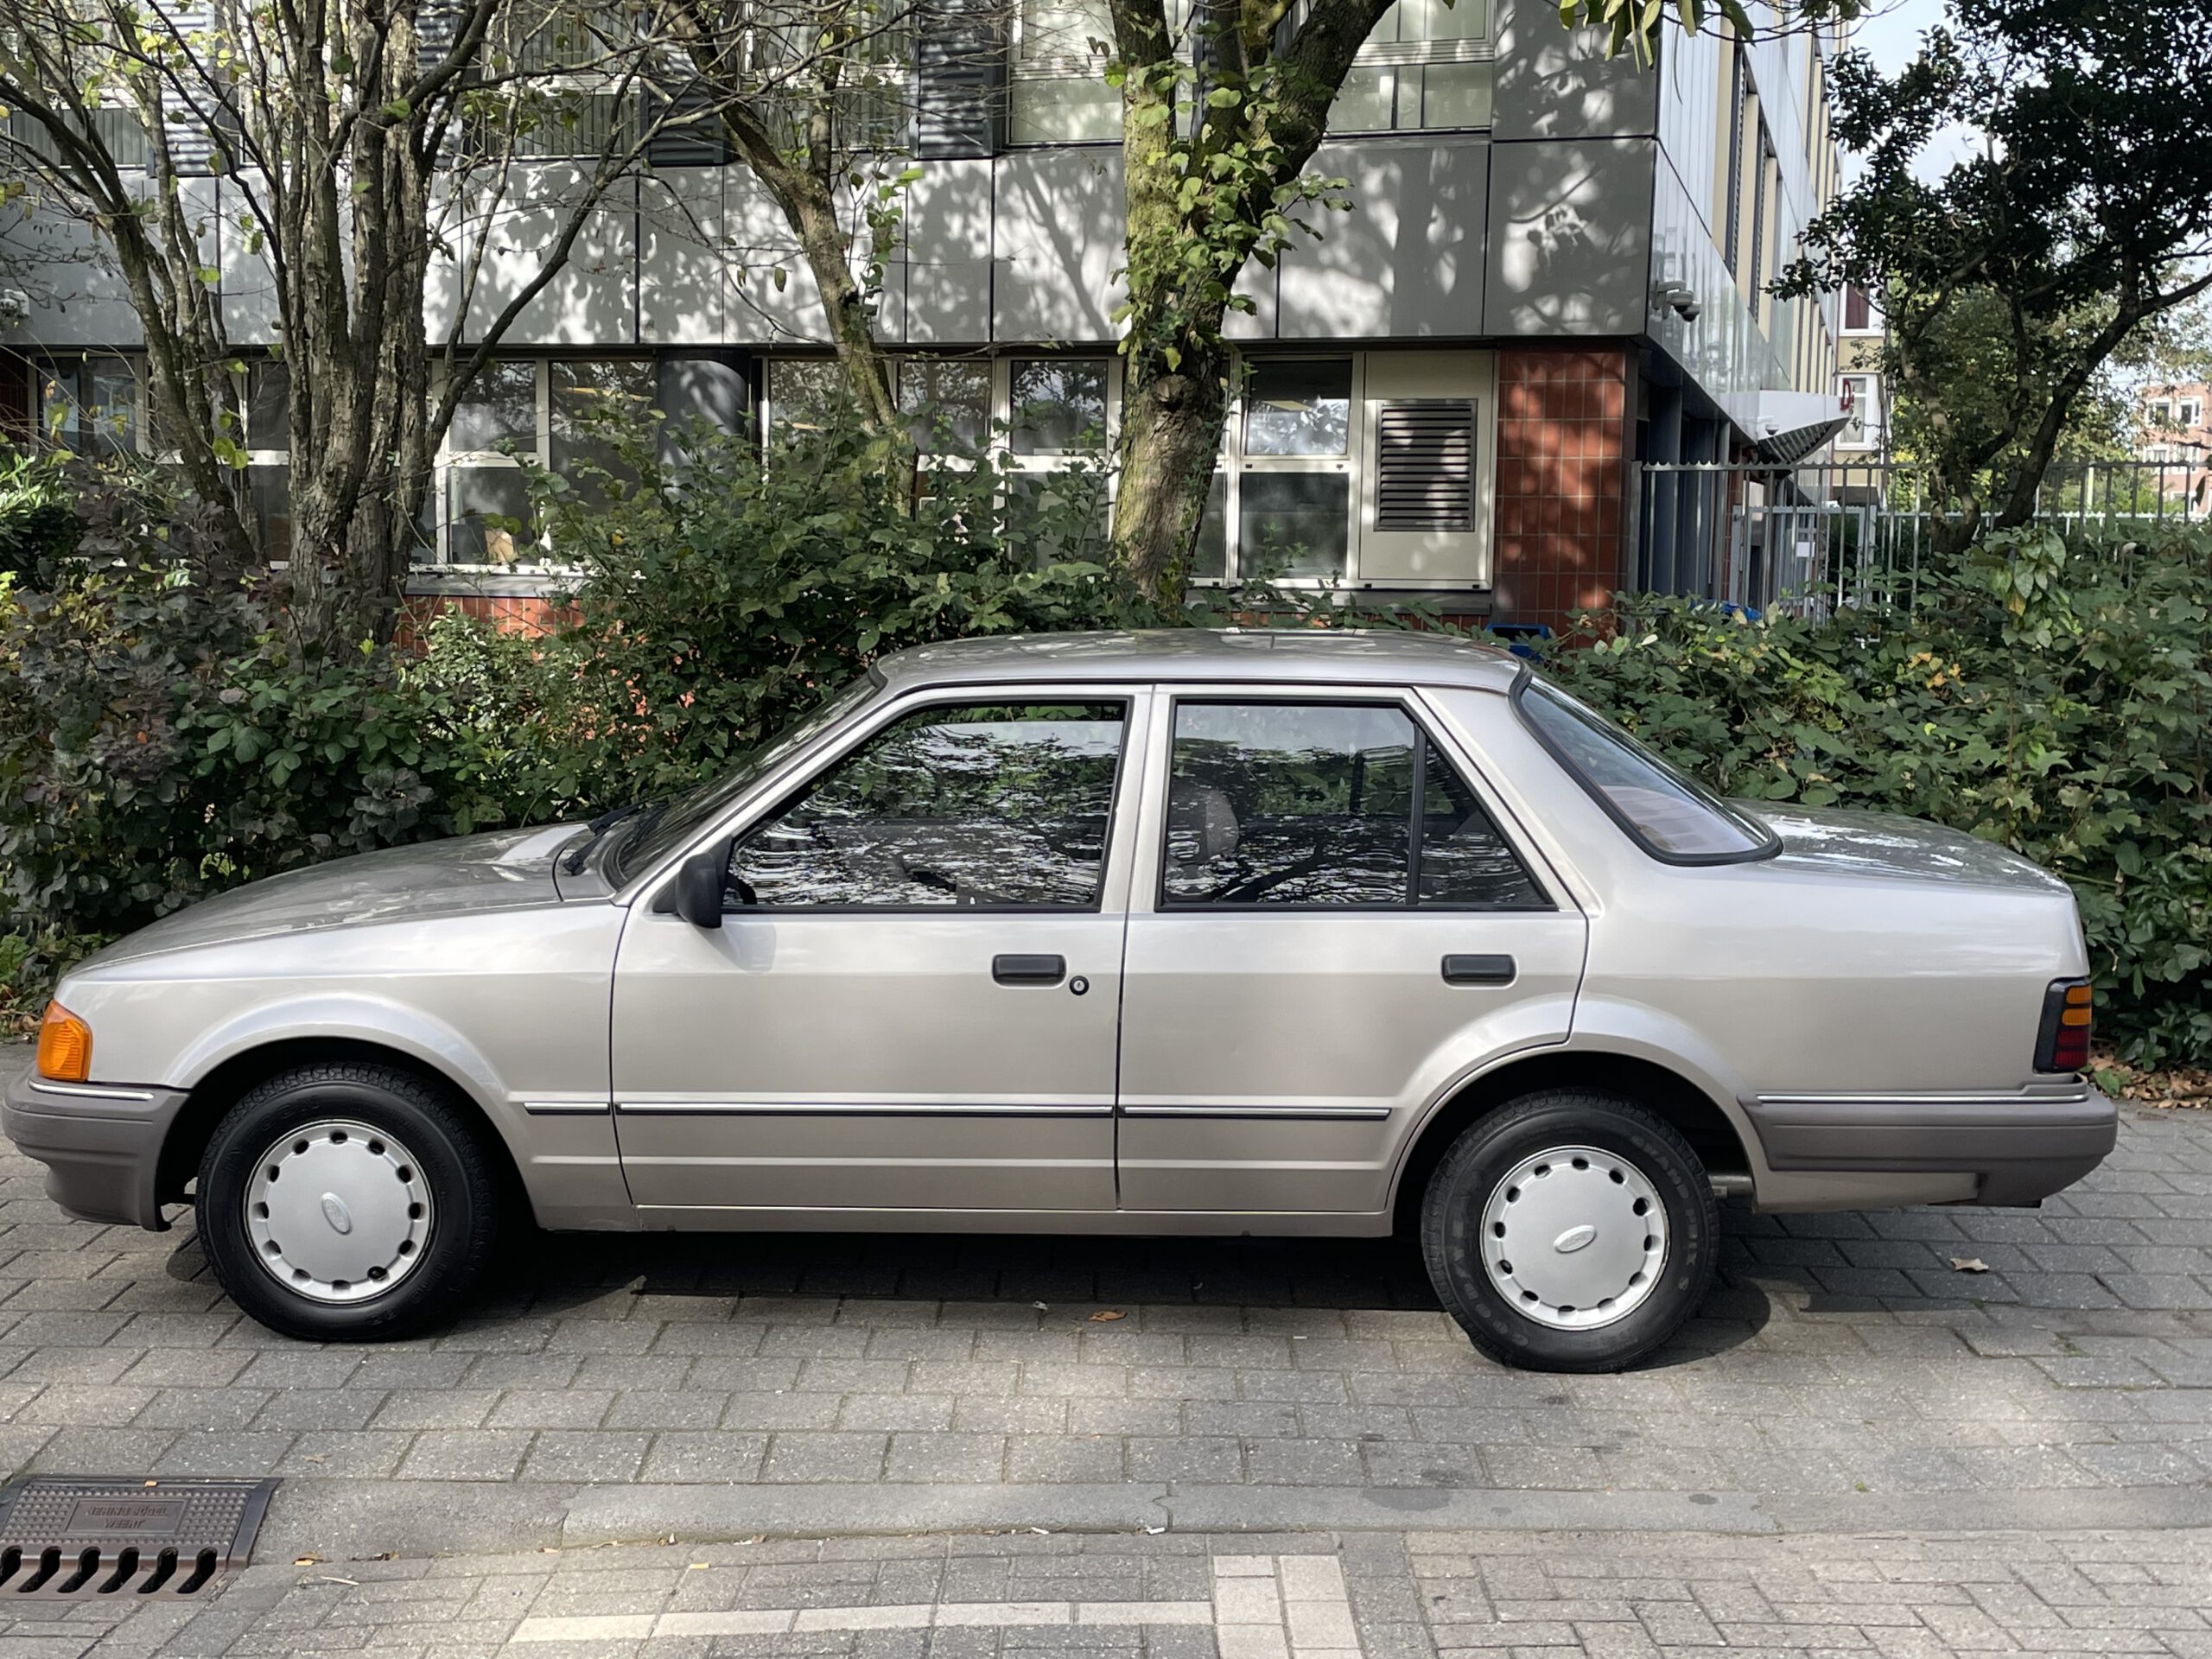 Ford Orion 1.4 CL